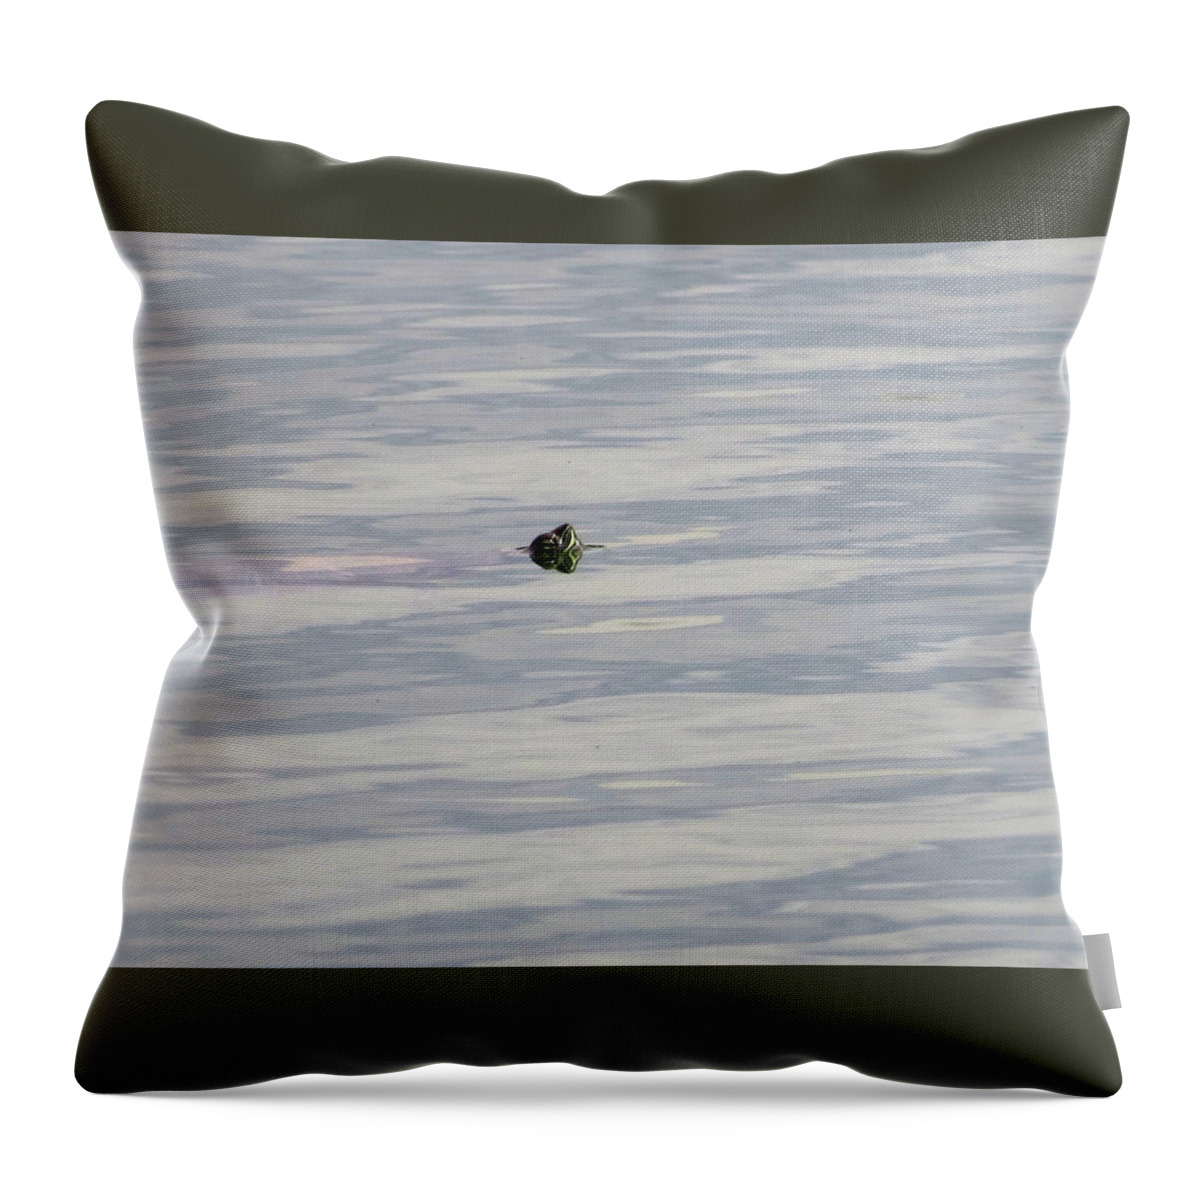 Reptile Throw Pillow featuring the photograph There He Is by Laurel Powell